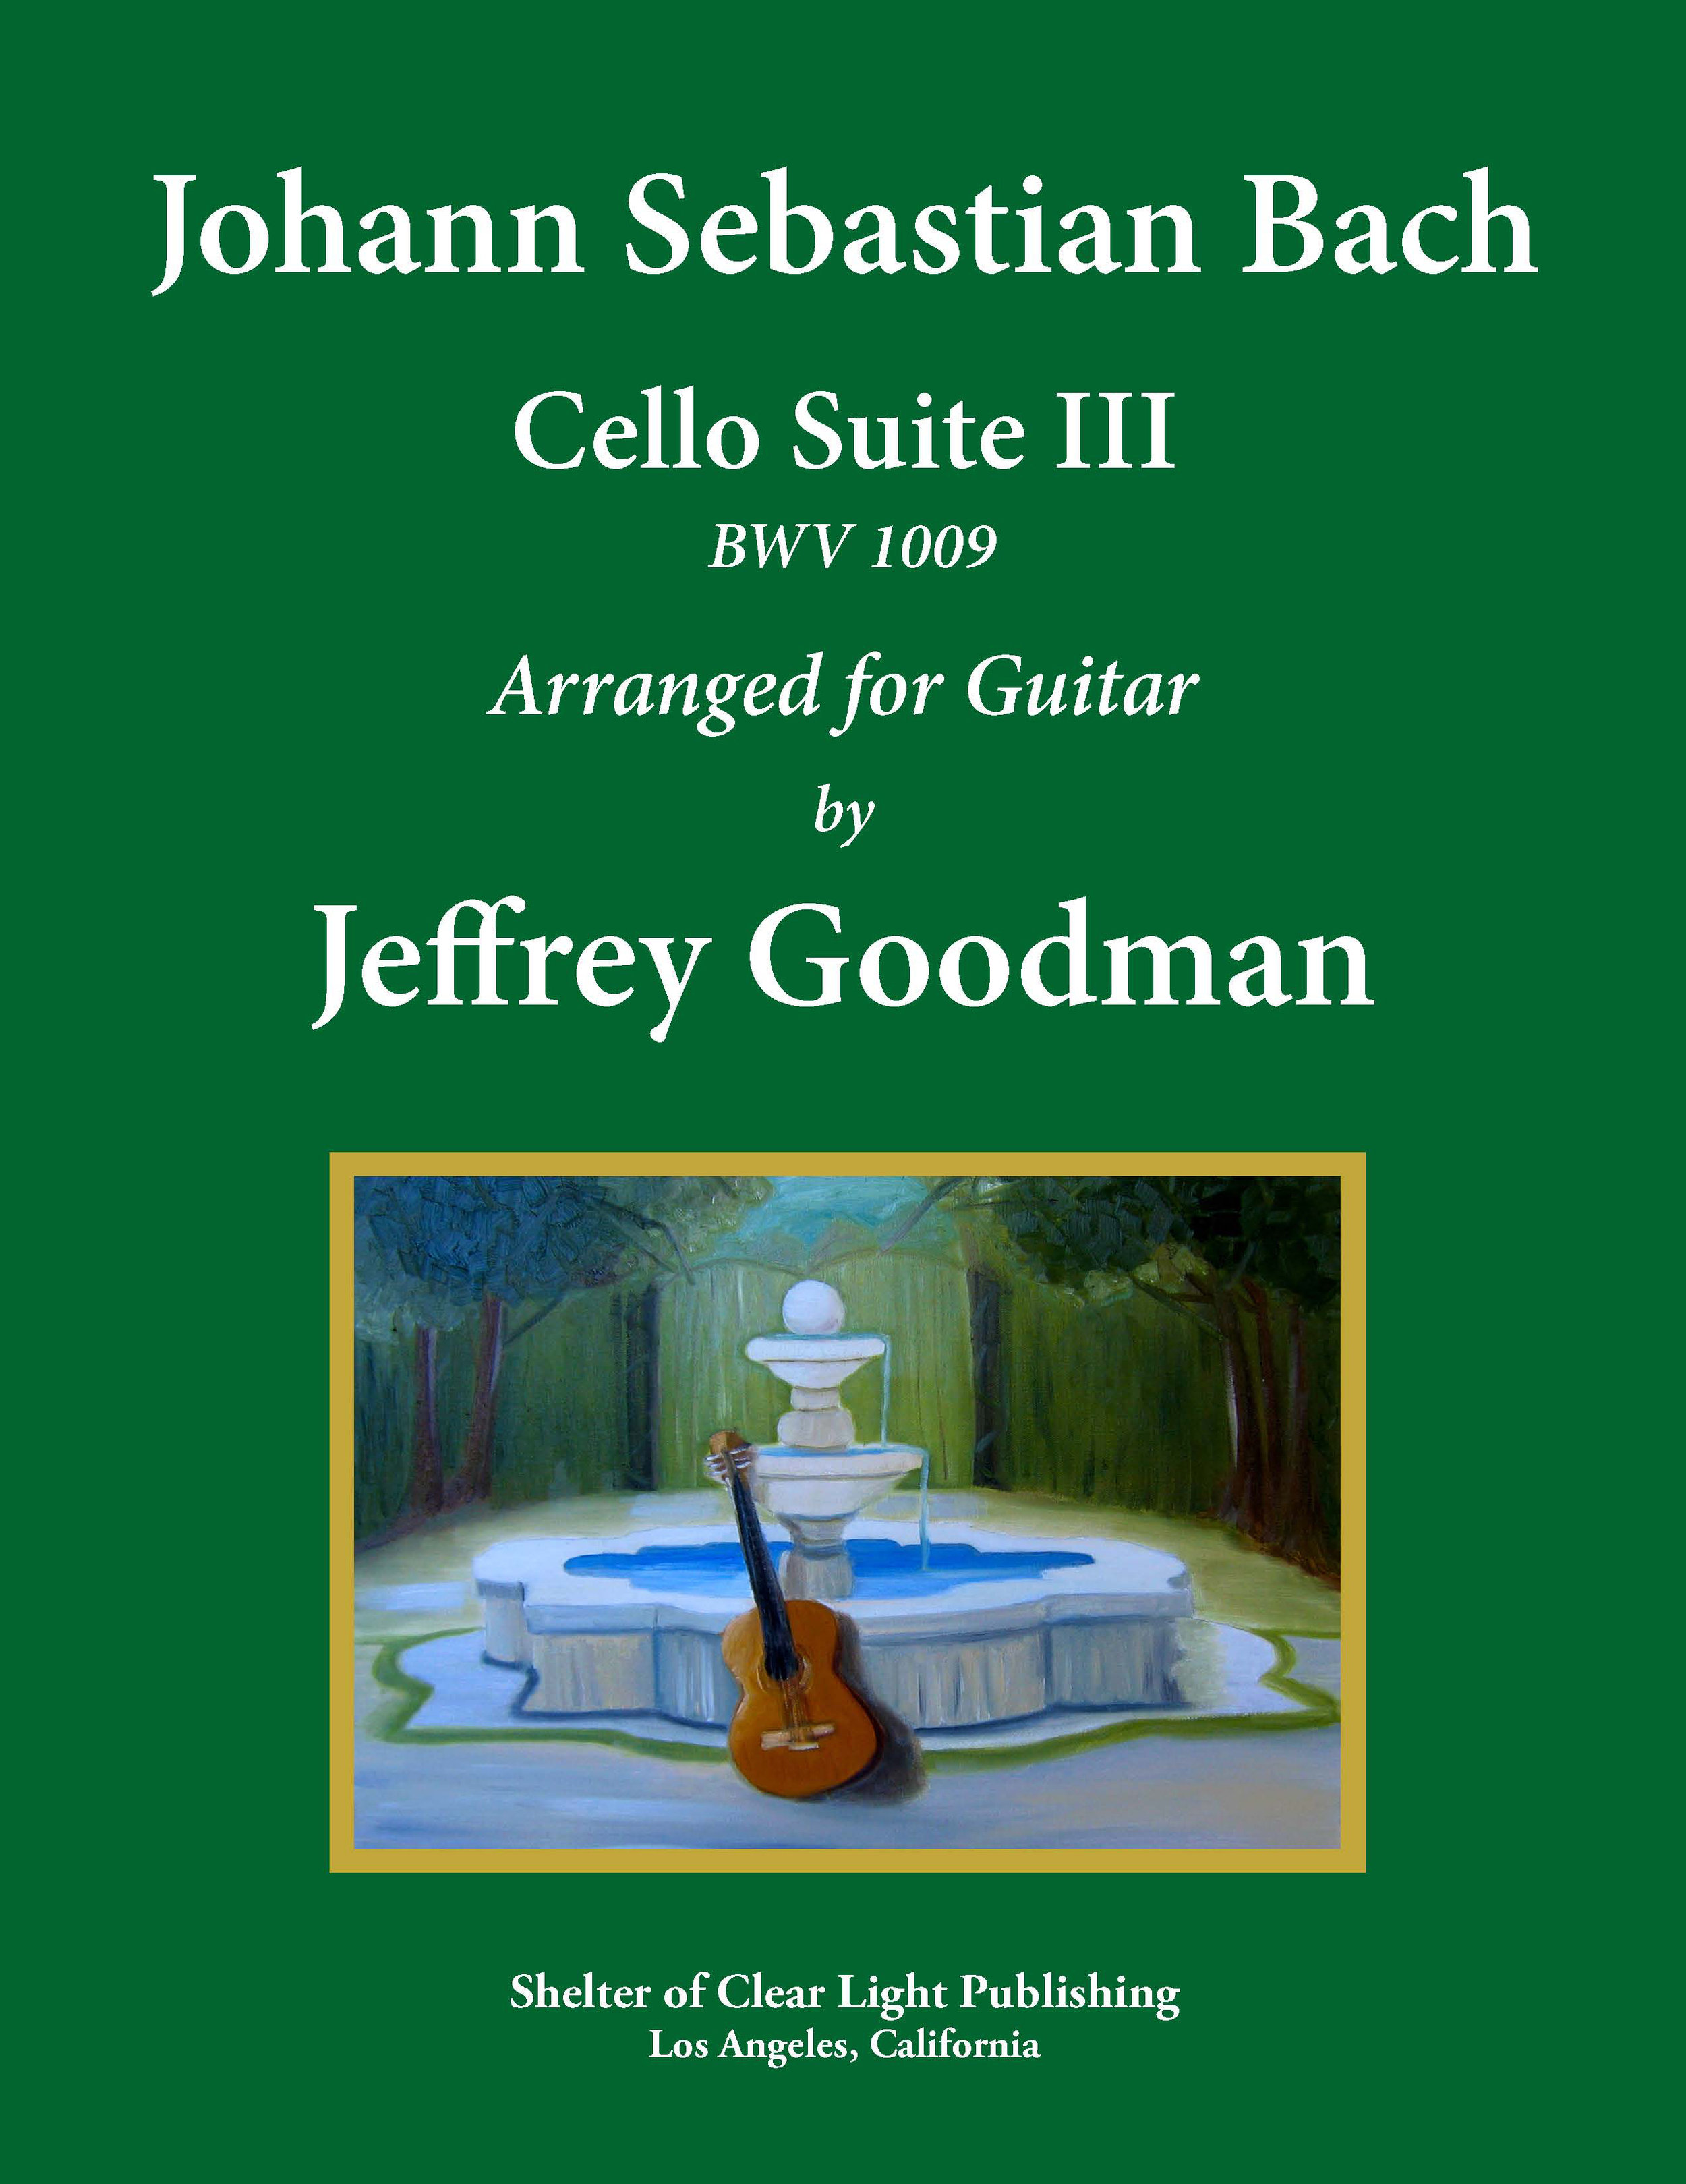 Bach Cello Suite III cover for JGM website .jpg